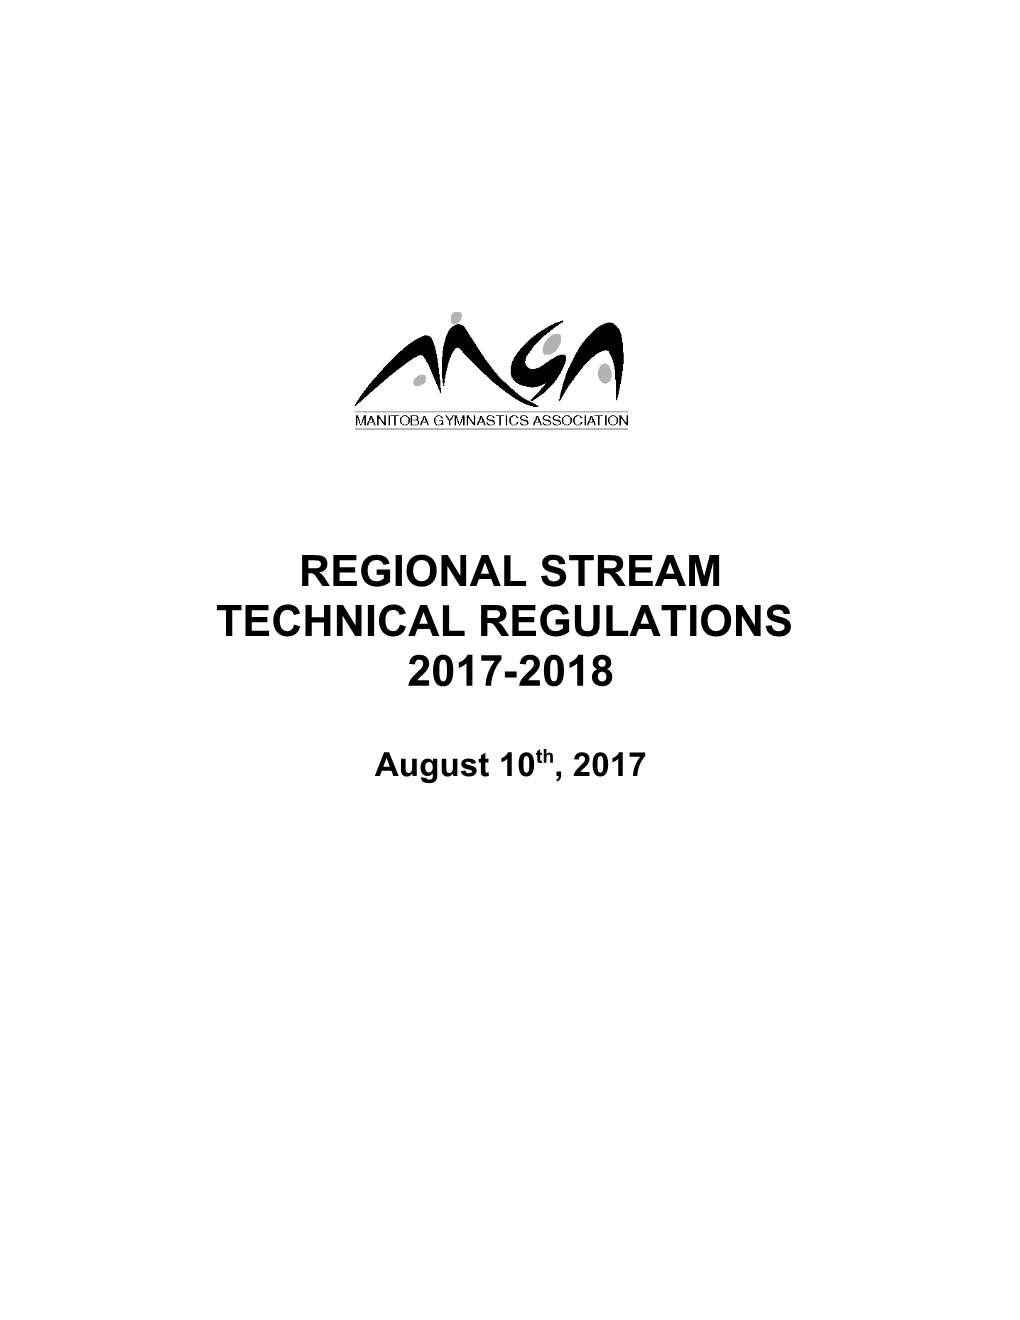 Section 1 Objectives, Structure and Operation of the Regional Stream Technical Assembly (RSTA)